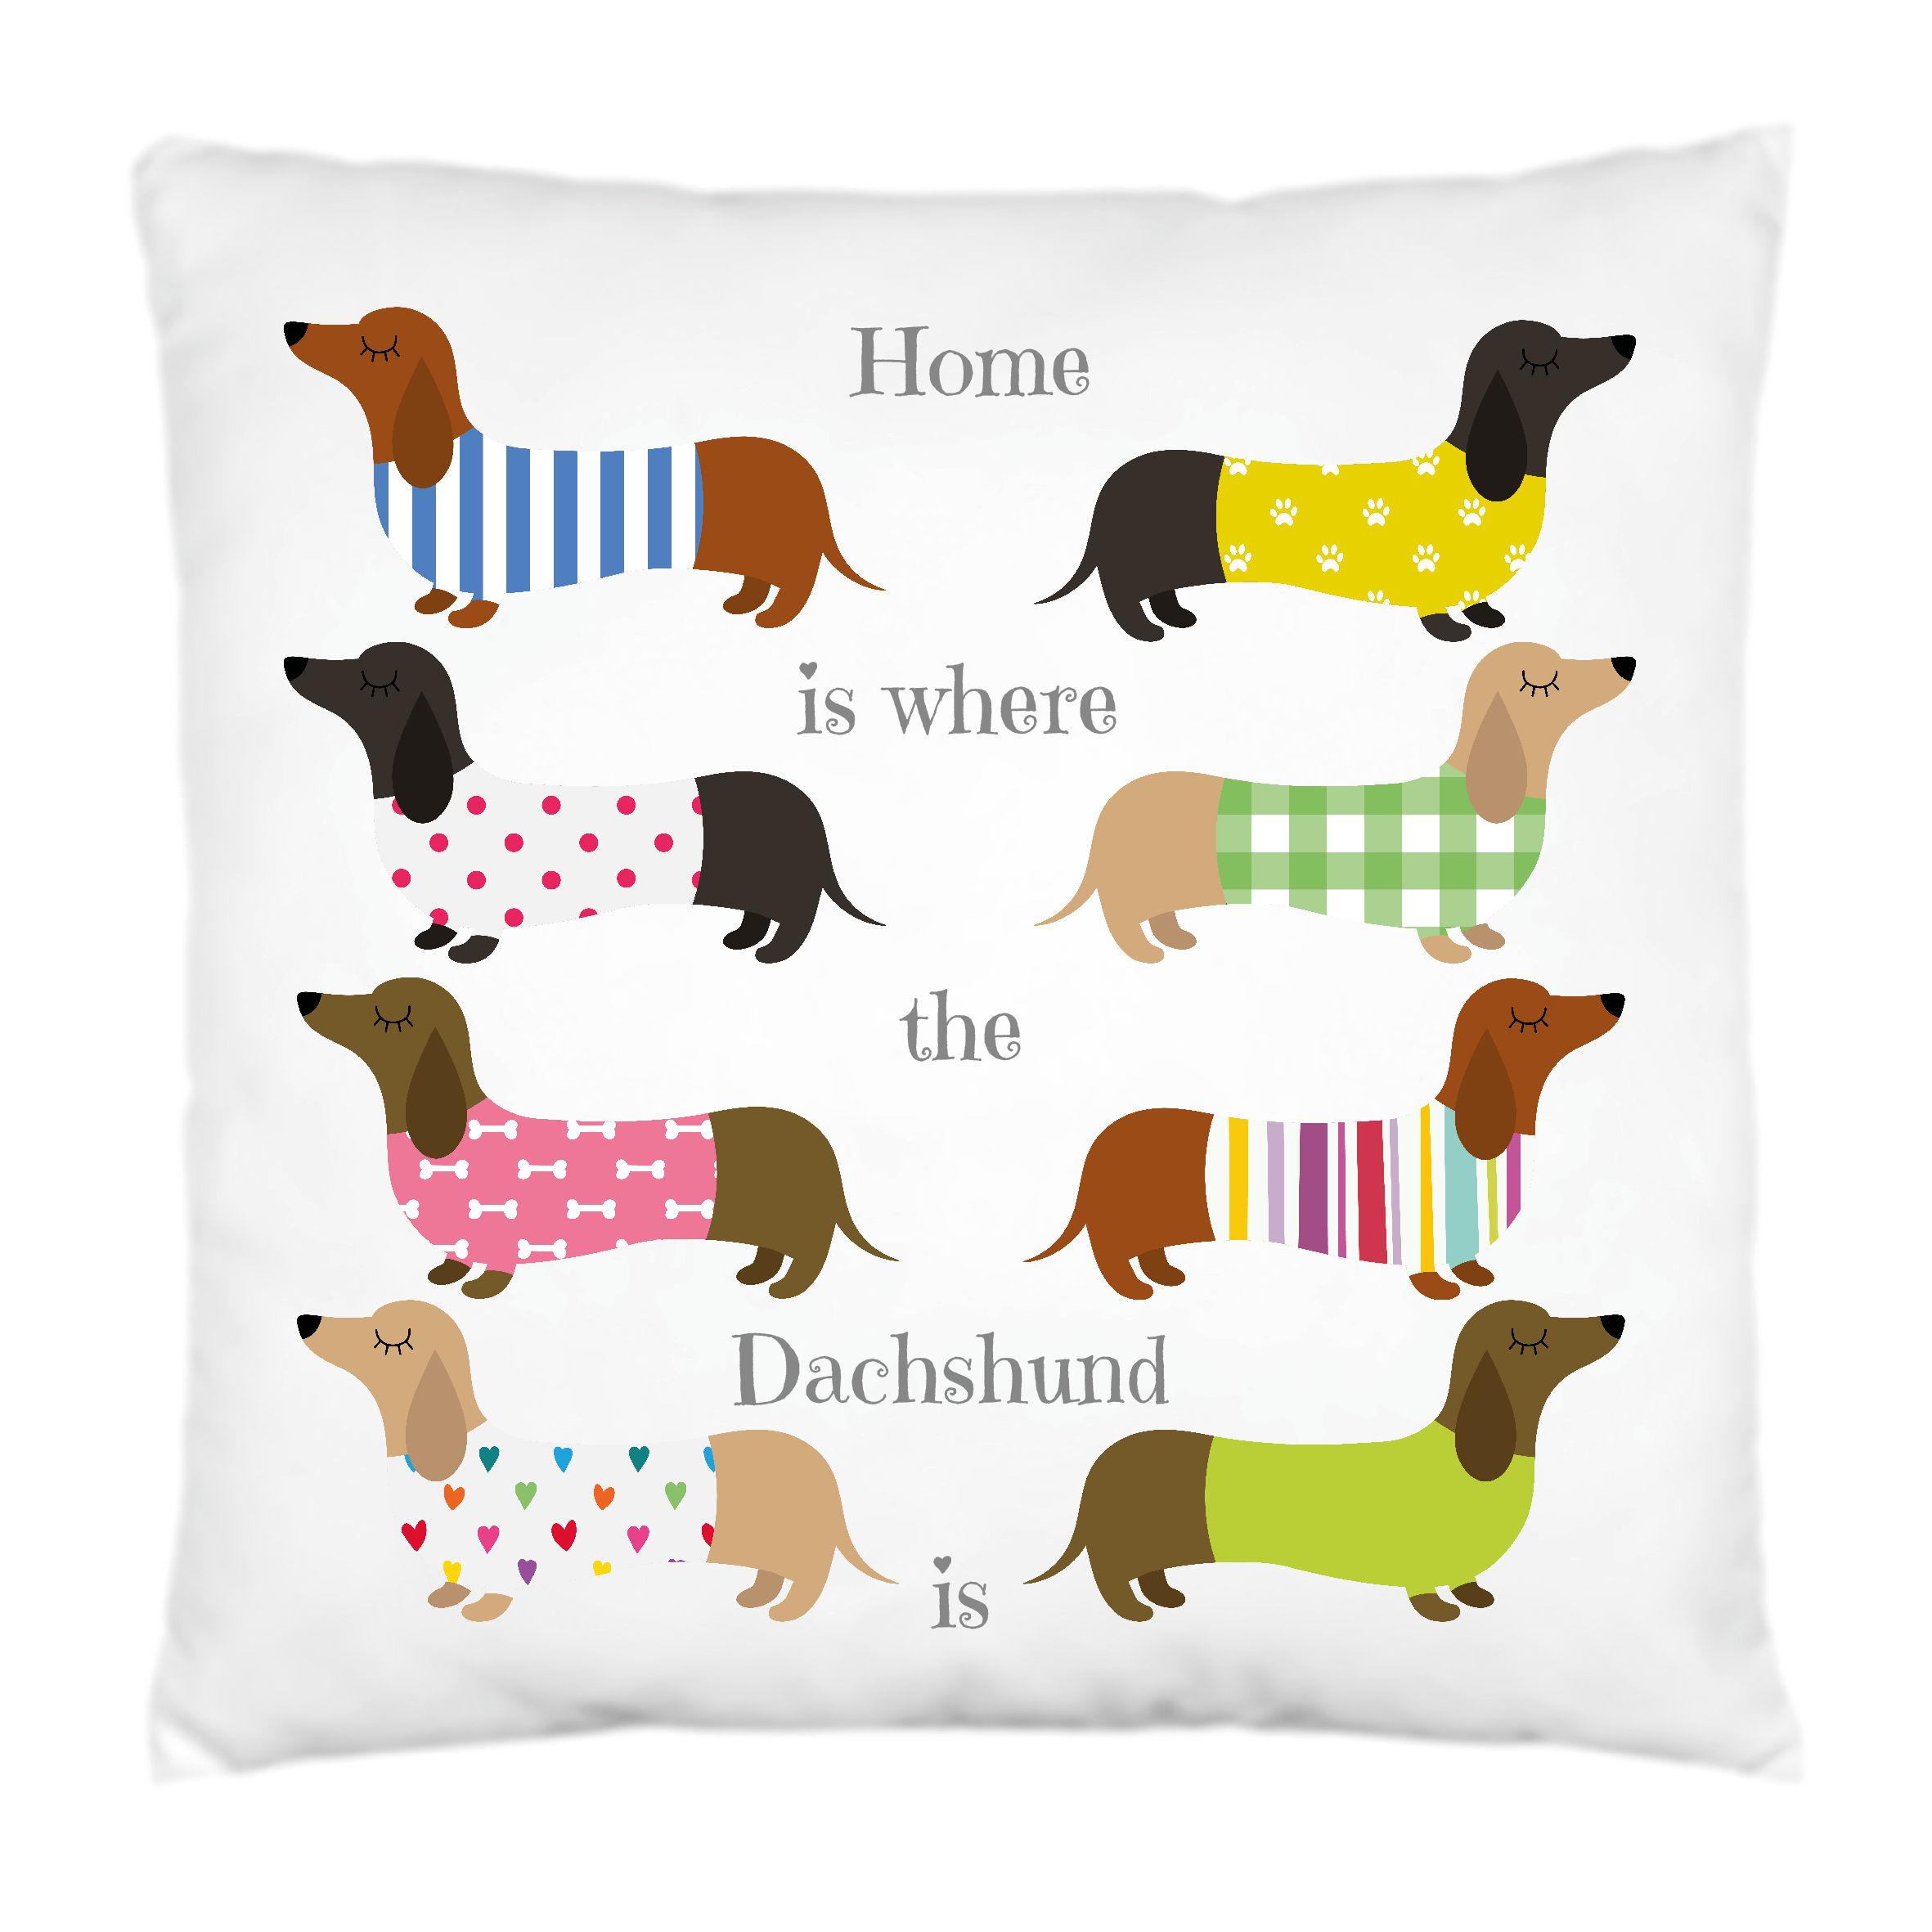 Dachshund Cushion,Pillow,Throw,Dogs,Gift for Dog Lovers,New Home Gift,Home Decor